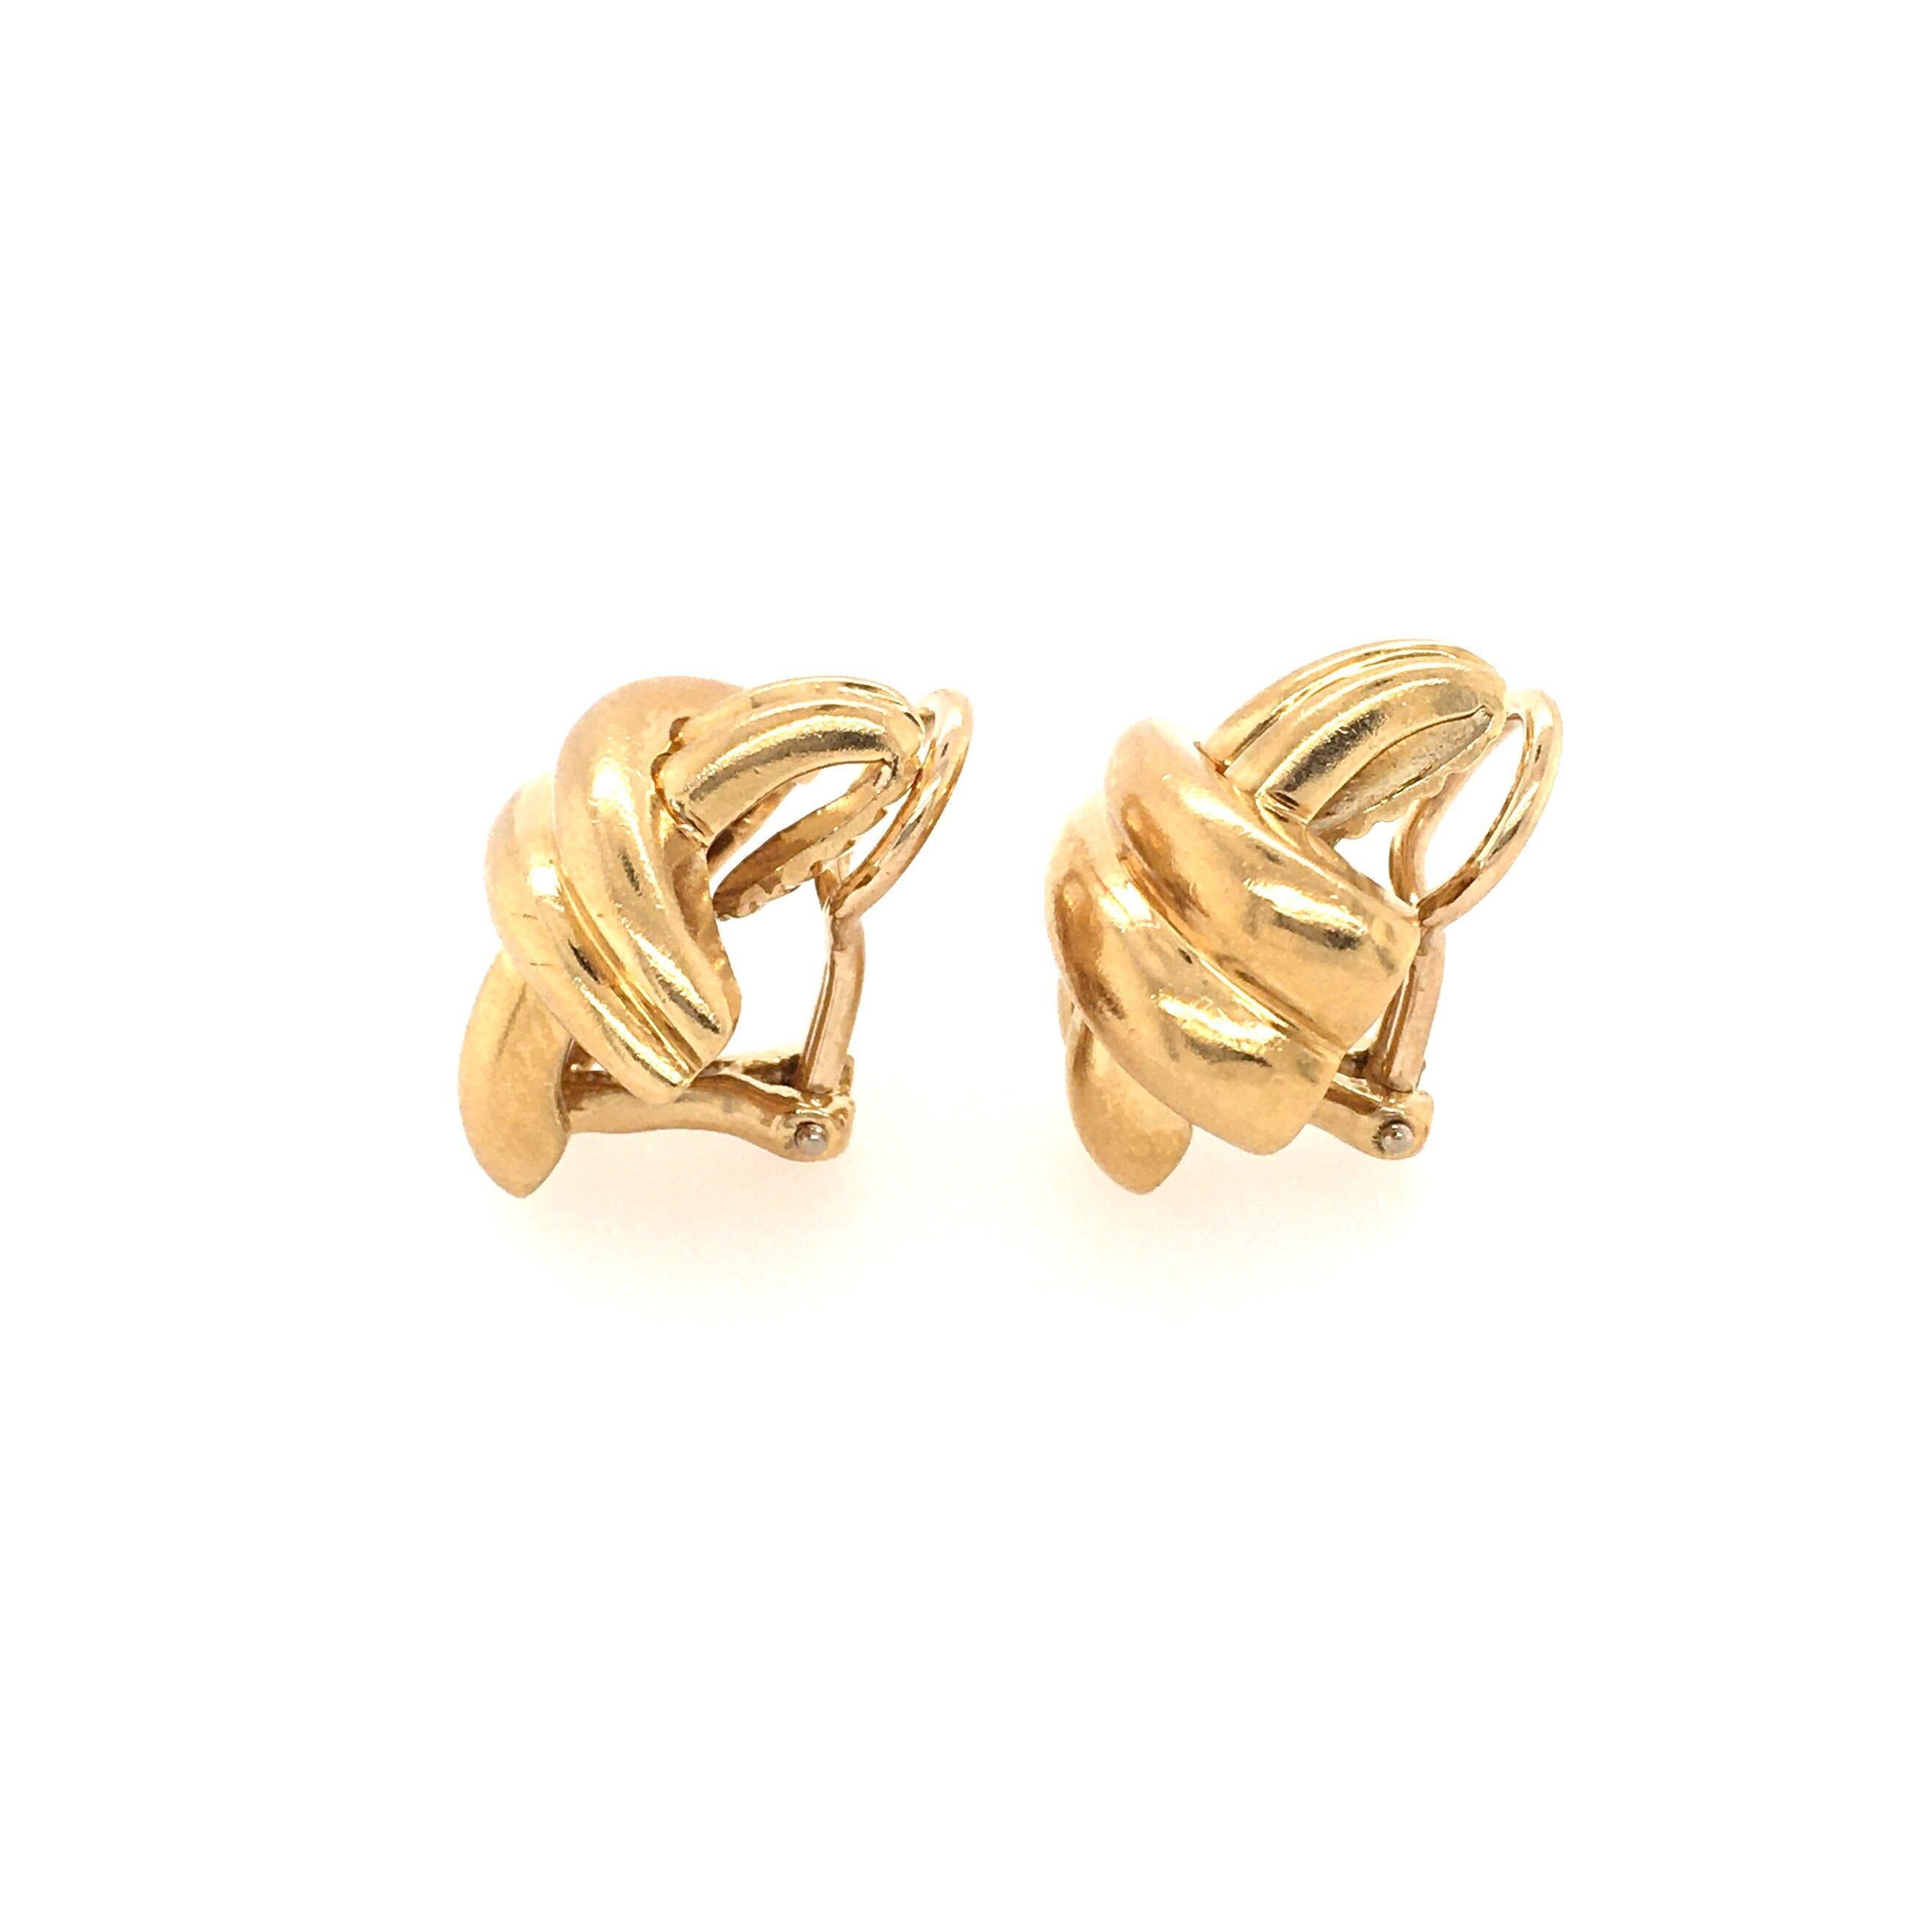 A pair of 18 karat yellow gold earrings. Asprey. Designed as a fluted gold X. Length is approximately3/4 inches, gross weight is approximately 13.4 grams. Stamped Asprey, 18K. 